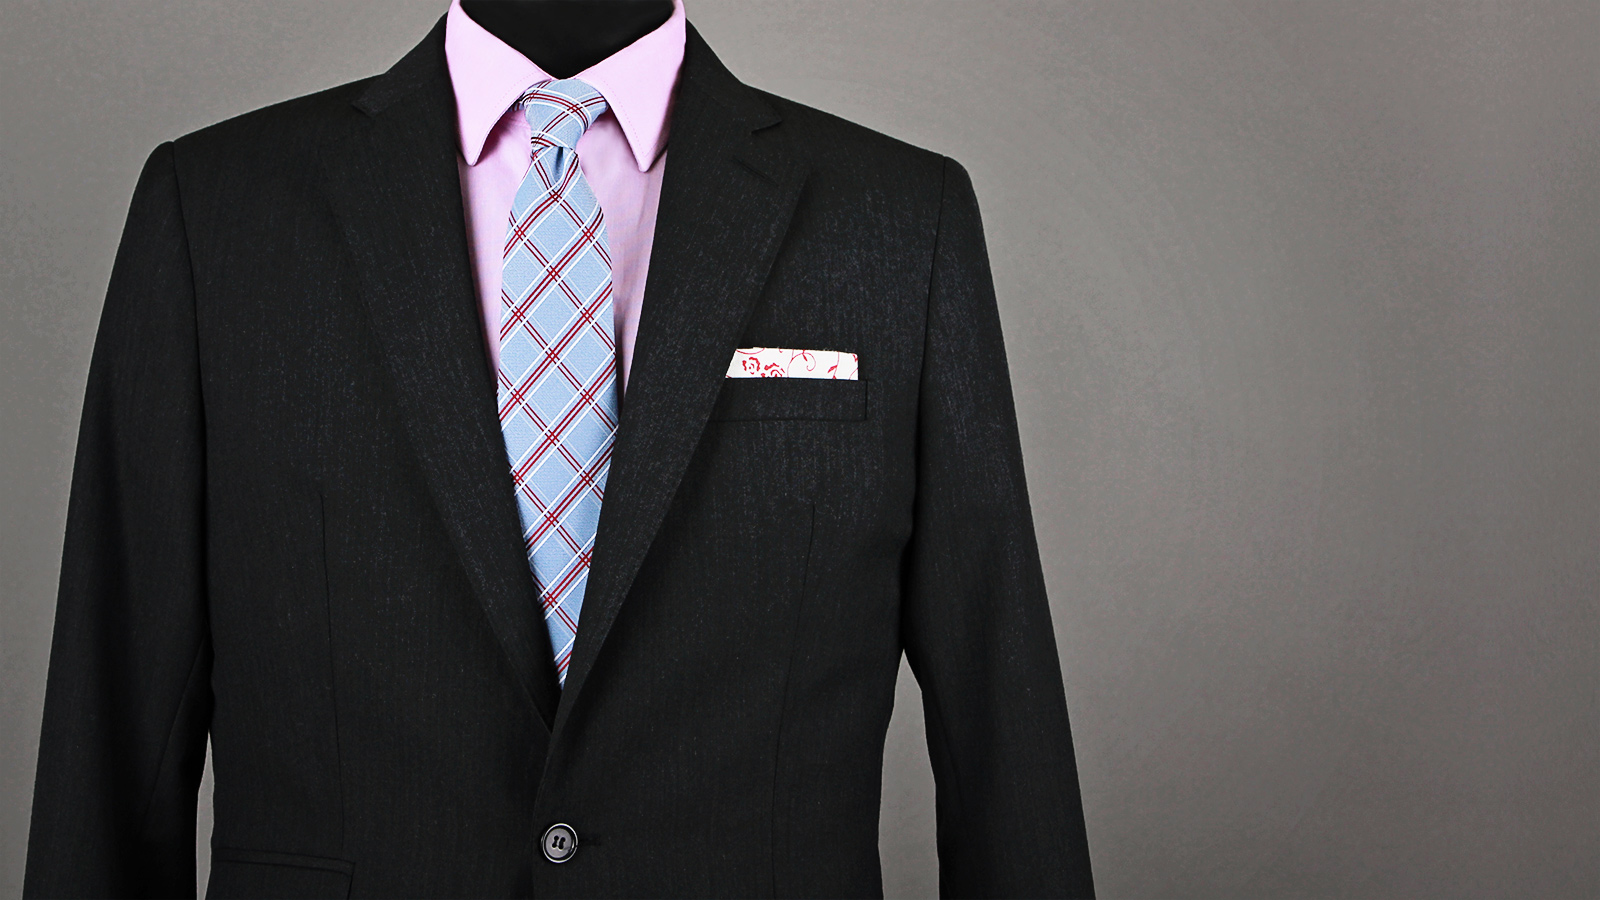 checked tie styling